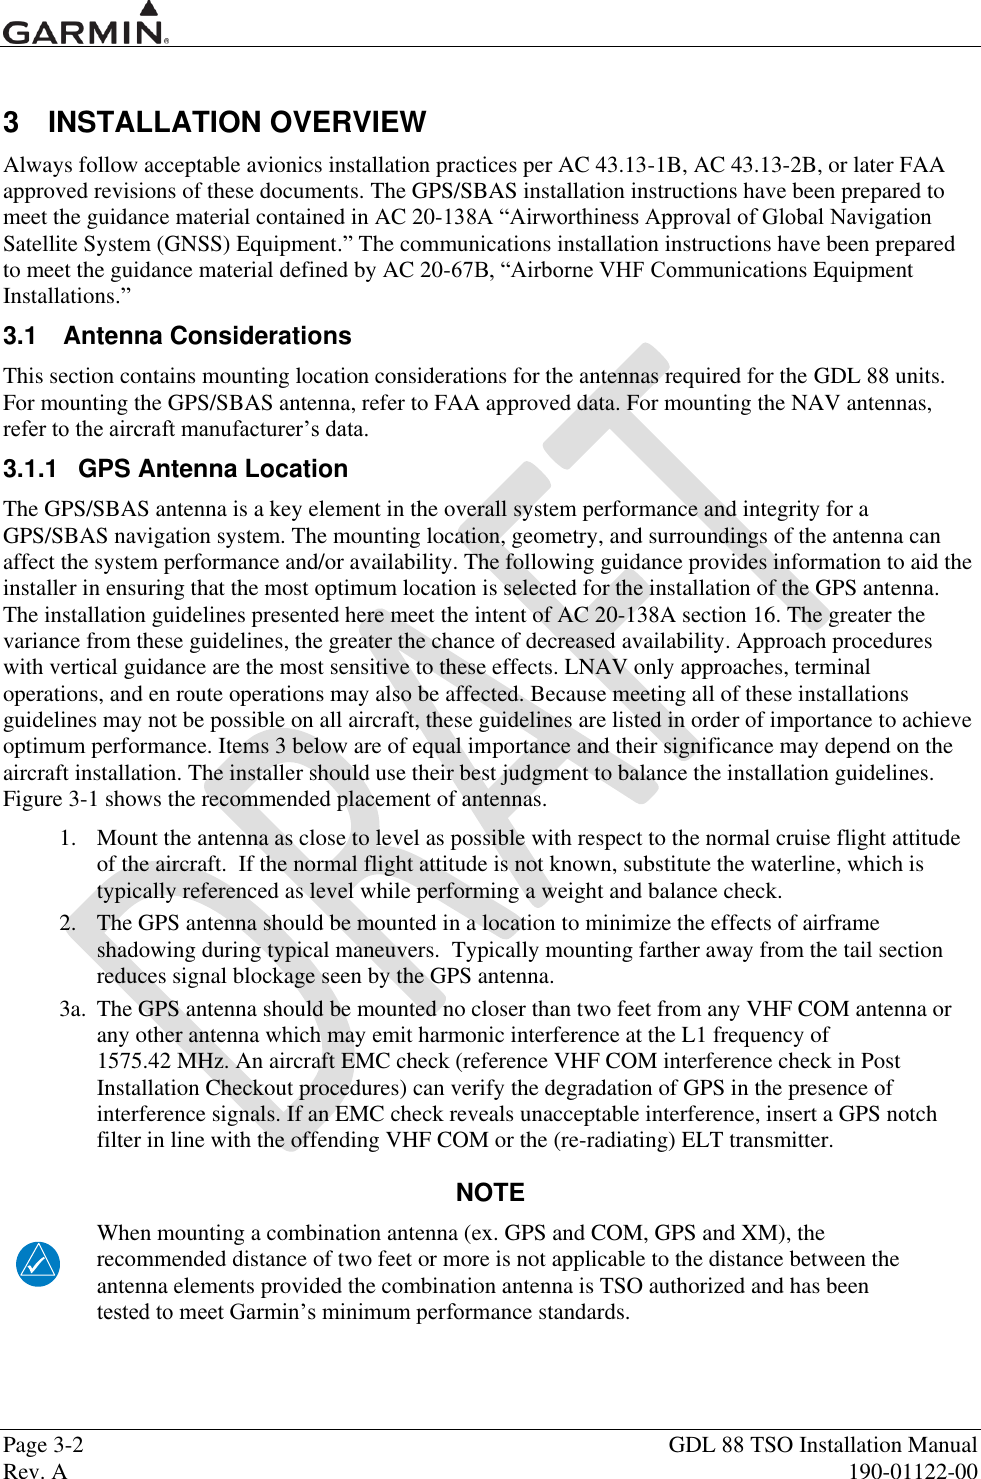  Page 3-2  GDL 88 TSO Installation Manual Rev. A  190-01122-00  3  INSTALLATION OVERVIEW Always follow acceptable avionics installation practices per AC 43.13-1B, AC 43.13-2B, or later FAA approved revisions of these documents. The GPS/SBAS installation instructions have been prepared to meet the guidance material contained in AC 20-138A “Airworthiness Approval of Global Navigation Satellite System (GNSS) Equipment.” The communications installation instructions have been prepared to meet the guidance material defined by AC 20-67B, “Airborne VHF Communications Equipment Installations.”  3.1  Antenna Considerations This section contains mounting location considerations for the antennas required for the GDL 88 units.  For mounting the GPS/SBAS antenna, refer to FAA approved data. For mounting the NAV antennas, refer to the aircraft manufacturer‟s data. 3.1.1  GPS Antenna Location The GPS/SBAS antenna is a key element in the overall system performance and integrity for a GPS/SBAS navigation system. The mounting location, geometry, and surroundings of the antenna can affect the system performance and/or availability. The following guidance provides information to aid the installer in ensuring that the most optimum location is selected for the installation of the GPS antenna. The installation guidelines presented here meet the intent of AC 20-138A section 16. The greater the variance from these guidelines, the greater the chance of decreased availability. Approach procedures with vertical guidance are the most sensitive to these effects. LNAV only approaches, terminal operations, and en route operations may also be affected. Because meeting all of these installations guidelines may not be possible on all aircraft, these guidelines are listed in order of importance to achieve optimum performance. Items 3 below are of equal importance and their significance may depend on the aircraft installation. The installer should use their best judgment to balance the installation guidelines. Figure 3-1 shows the recommended placement of antennas. 1.  Mount the antenna as close to level as possible with respect to the normal cruise flight attitude of the aircraft.  If the normal flight attitude is not known, substitute the waterline, which is typically referenced as level while performing a weight and balance check. 2.  The GPS antenna should be mounted in a location to minimize the effects of airframe shadowing during typical maneuvers.  Typically mounting farther away from the tail section reduces signal blockage seen by the GPS antenna.   3a.  The GPS antenna should be mounted no closer than two feet from any VHF COM antenna or any other antenna which may emit harmonic interference at the L1 frequency of  1575.42 MHz. An aircraft EMC check (reference VHF COM interference check in Post Installation Checkout procedures) can verify the degradation of GPS in the presence of interference signals. If an EMC check reveals unacceptable interference, insert a GPS notch filter in line with the offending VHF COM or the (re-radiating) ELT transmitter. NOTE When mounting a combination antenna (ex. GPS and COM, GPS and XM), the recommended distance of two feet or more is not applicable to the distance between the antenna elements provided the combination antenna is TSO authorized and has been tested to meet Garmin‟s minimum performance standards. 